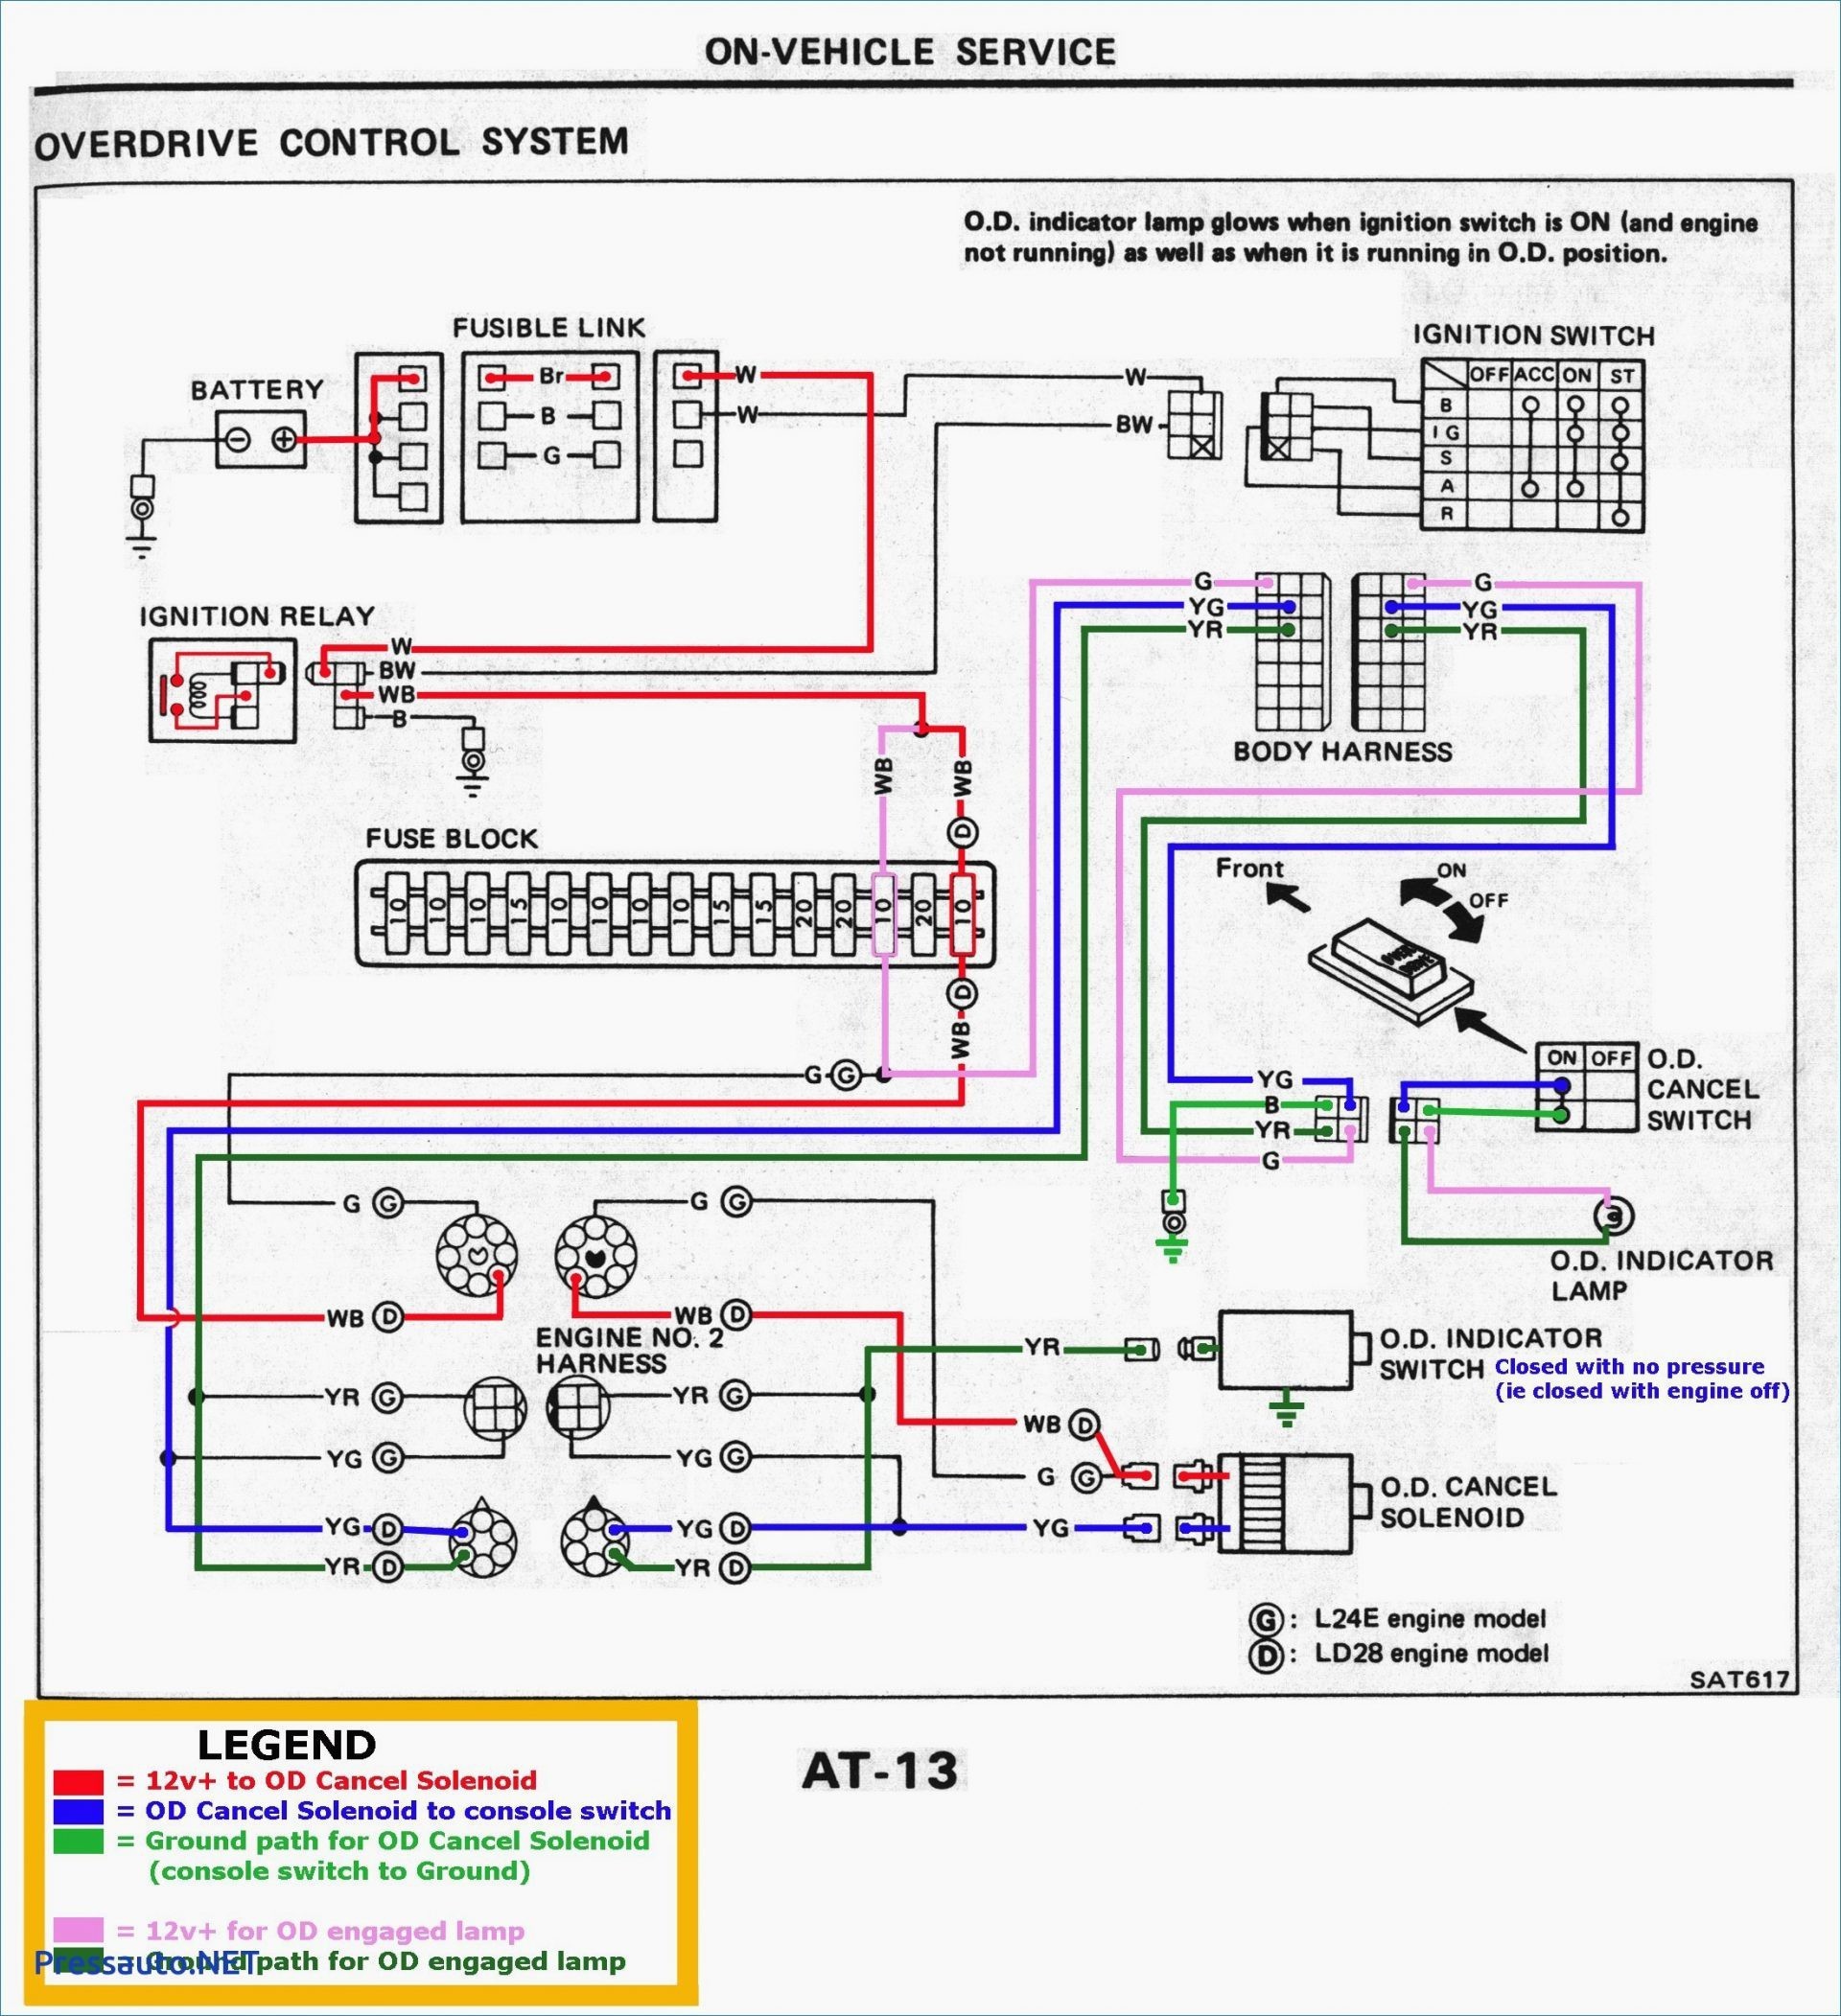 Wiring Diagram For Windshield Wiper Motor Book 2009 Avalanche Wiper Motor Wiring Diagram Windshield Wiper Amp